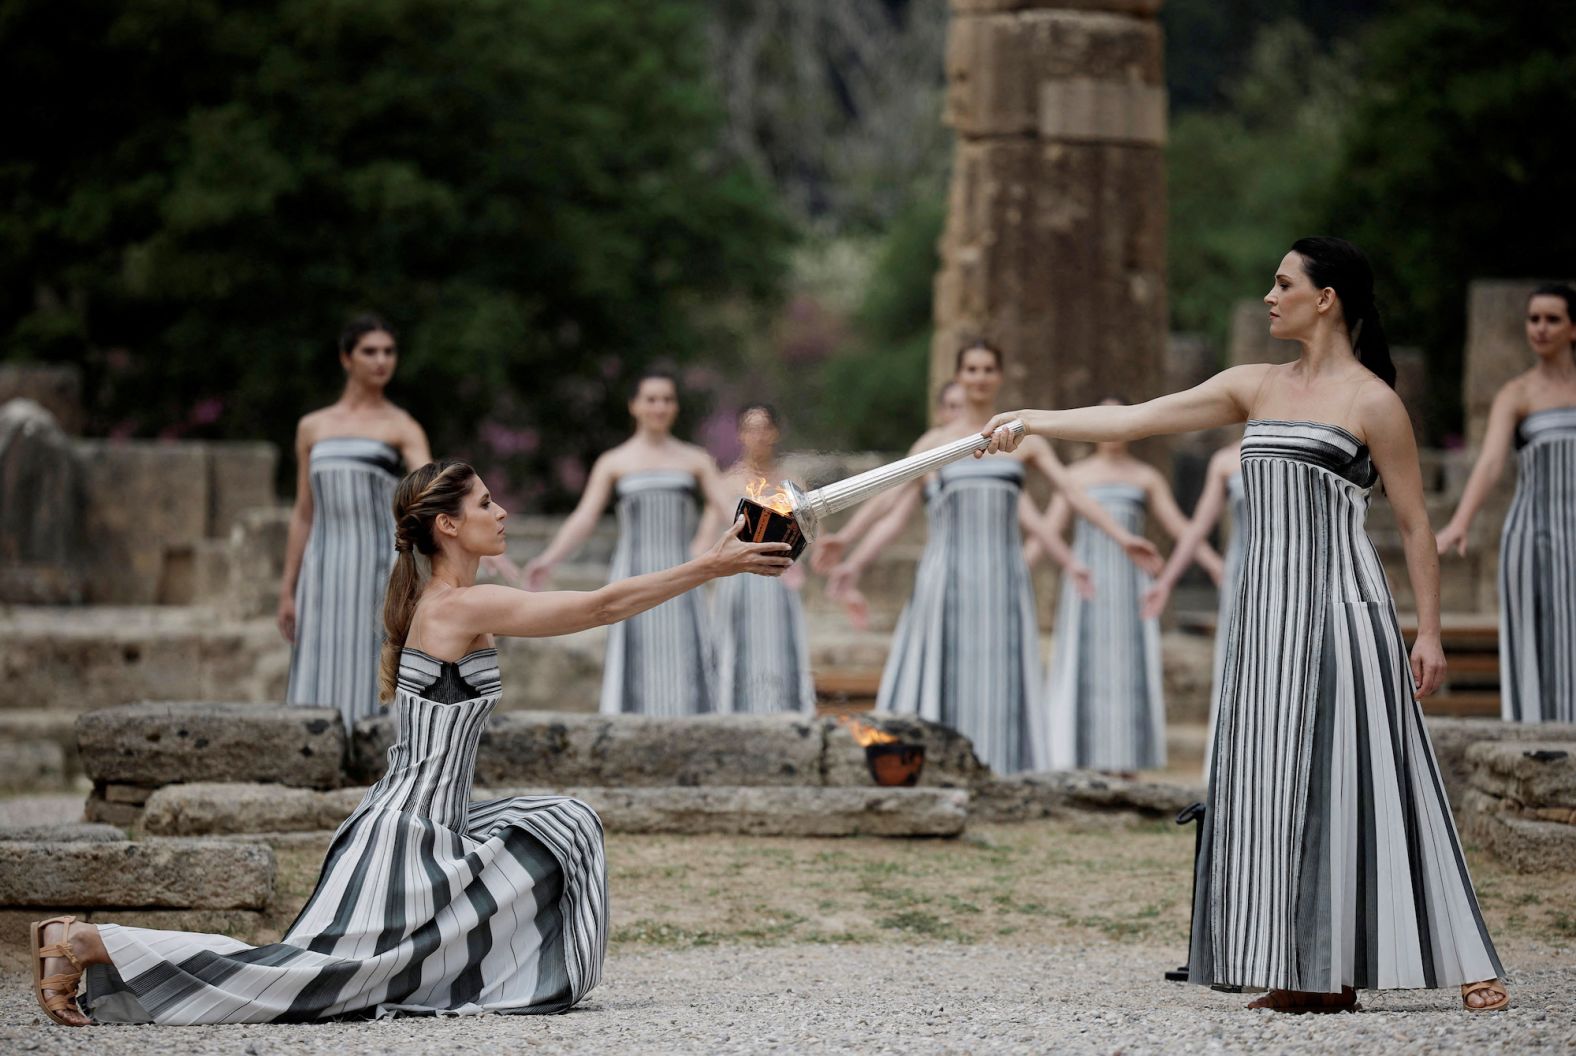 Greek actress Mary Mina, playing the role of High Priestess, carries the torch during the <a href="index.php?page=&url=https%3A%2F%2Fwww.cnn.com%2F2024%2F04%2F16%2Fsport%2Fparis-2024-olympic-flame-lit-spt-intl%2Findex.html" target="_blank">Olympic flame lighting ceremony</a> for the Paris 2024 Olympics in Ancient Olympia, Greece, on Tuesday, April 16. The flame will now begin its journey in a relay to light the cauldron that will mark the opening for the Summer Games in July.